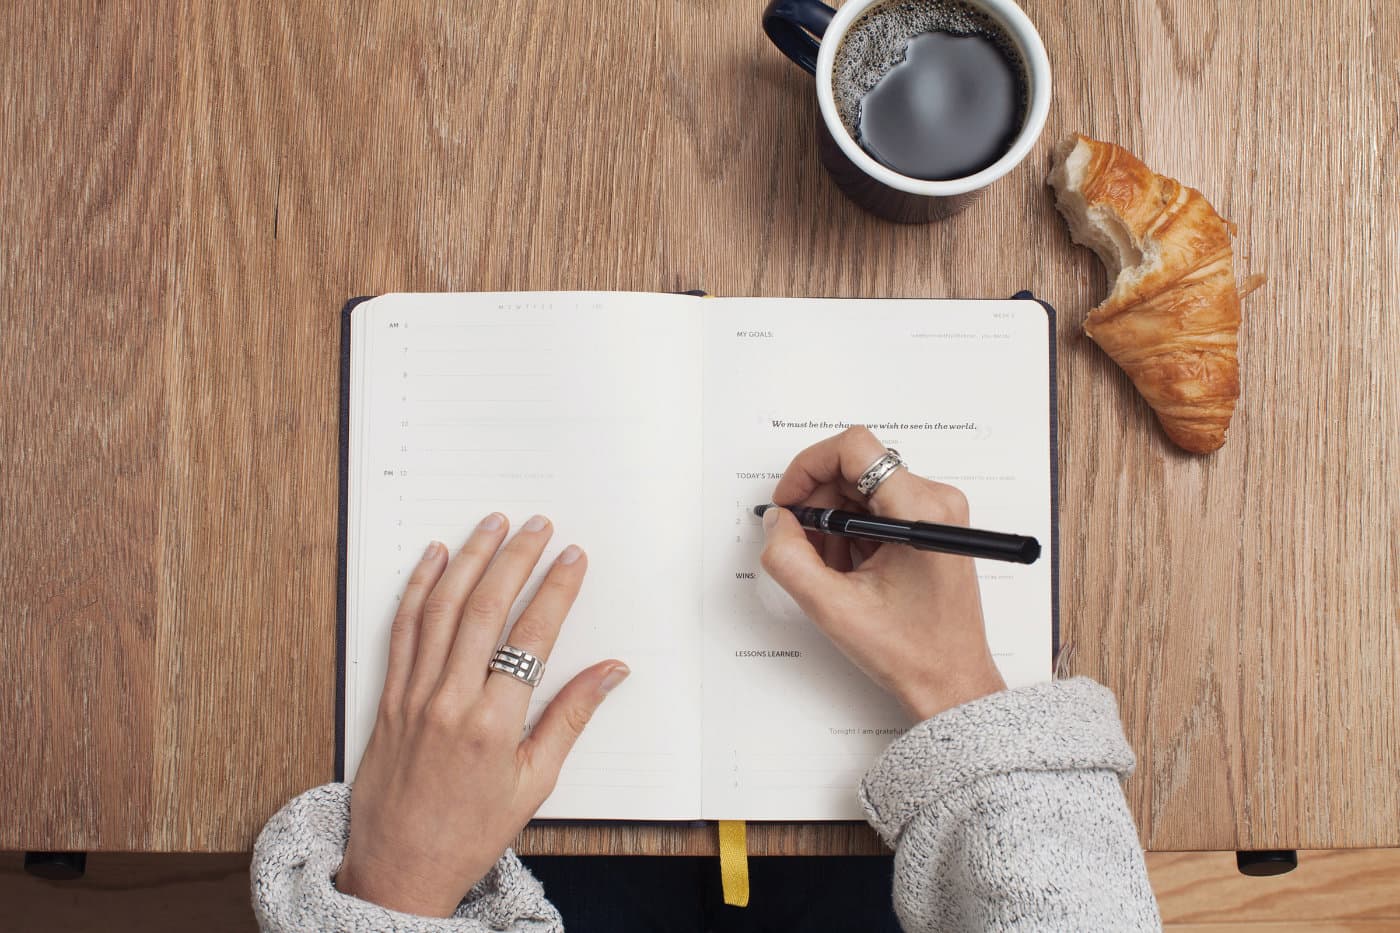 A table with a notebook, a coffee mug and a croissant from above. A women is taking notes.